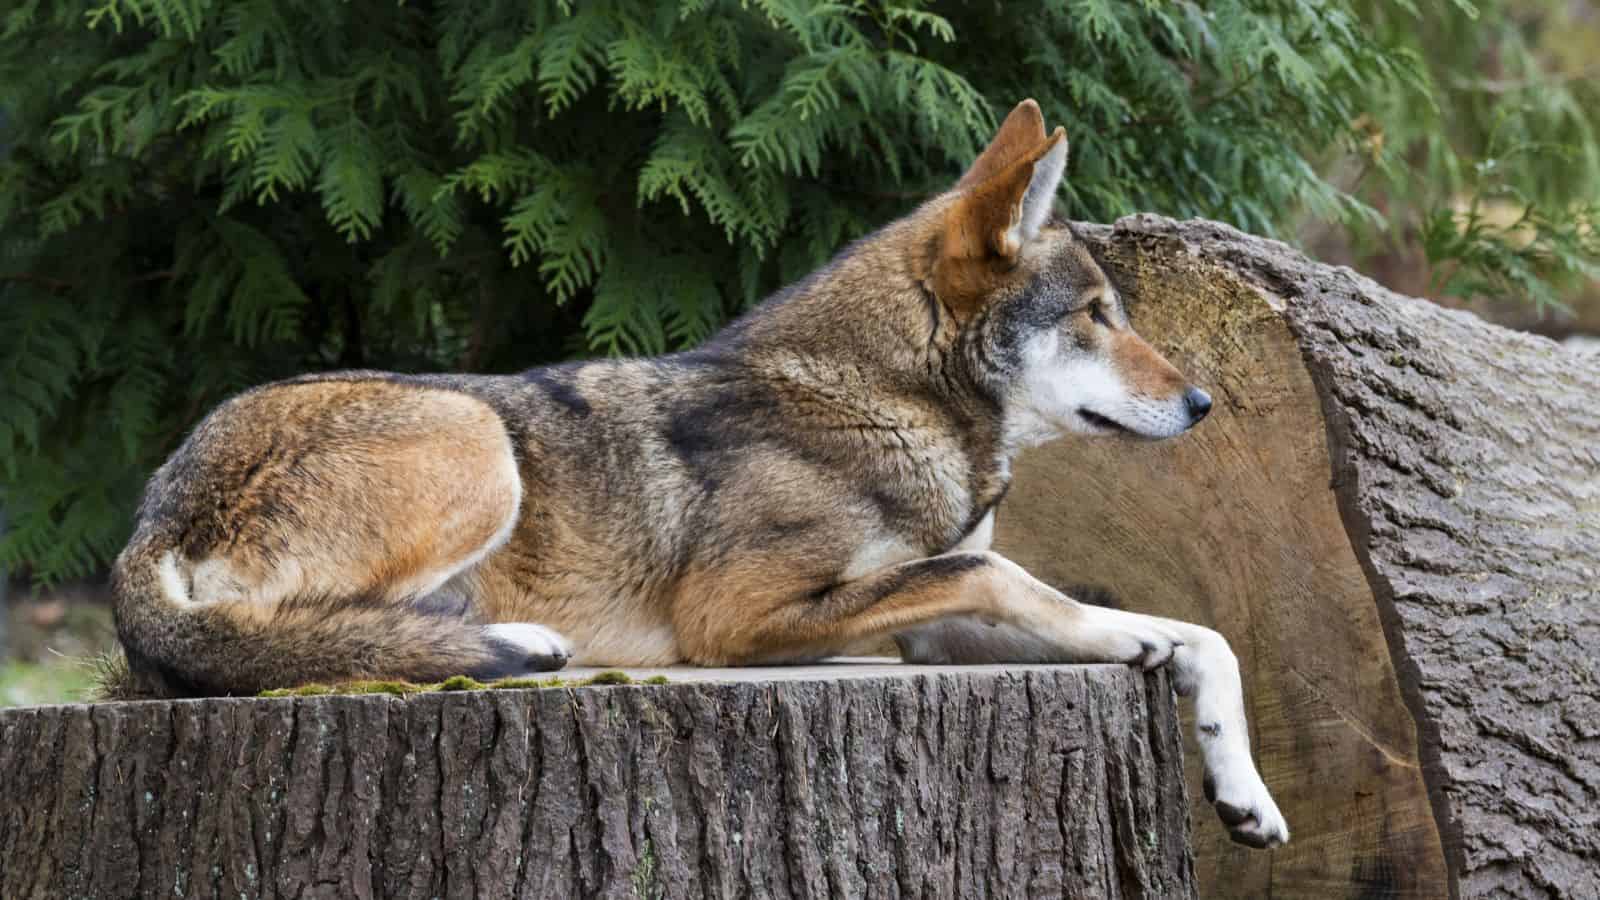 <p><span>In 1980, the red wolf was thought to be extinct in the U.S. Their lack of survival was a direct result of predator control programs and the degradation of their habitats. However, since then, efforts have been made to reintroduce the red wolf into the world in the U.S.</span></p>